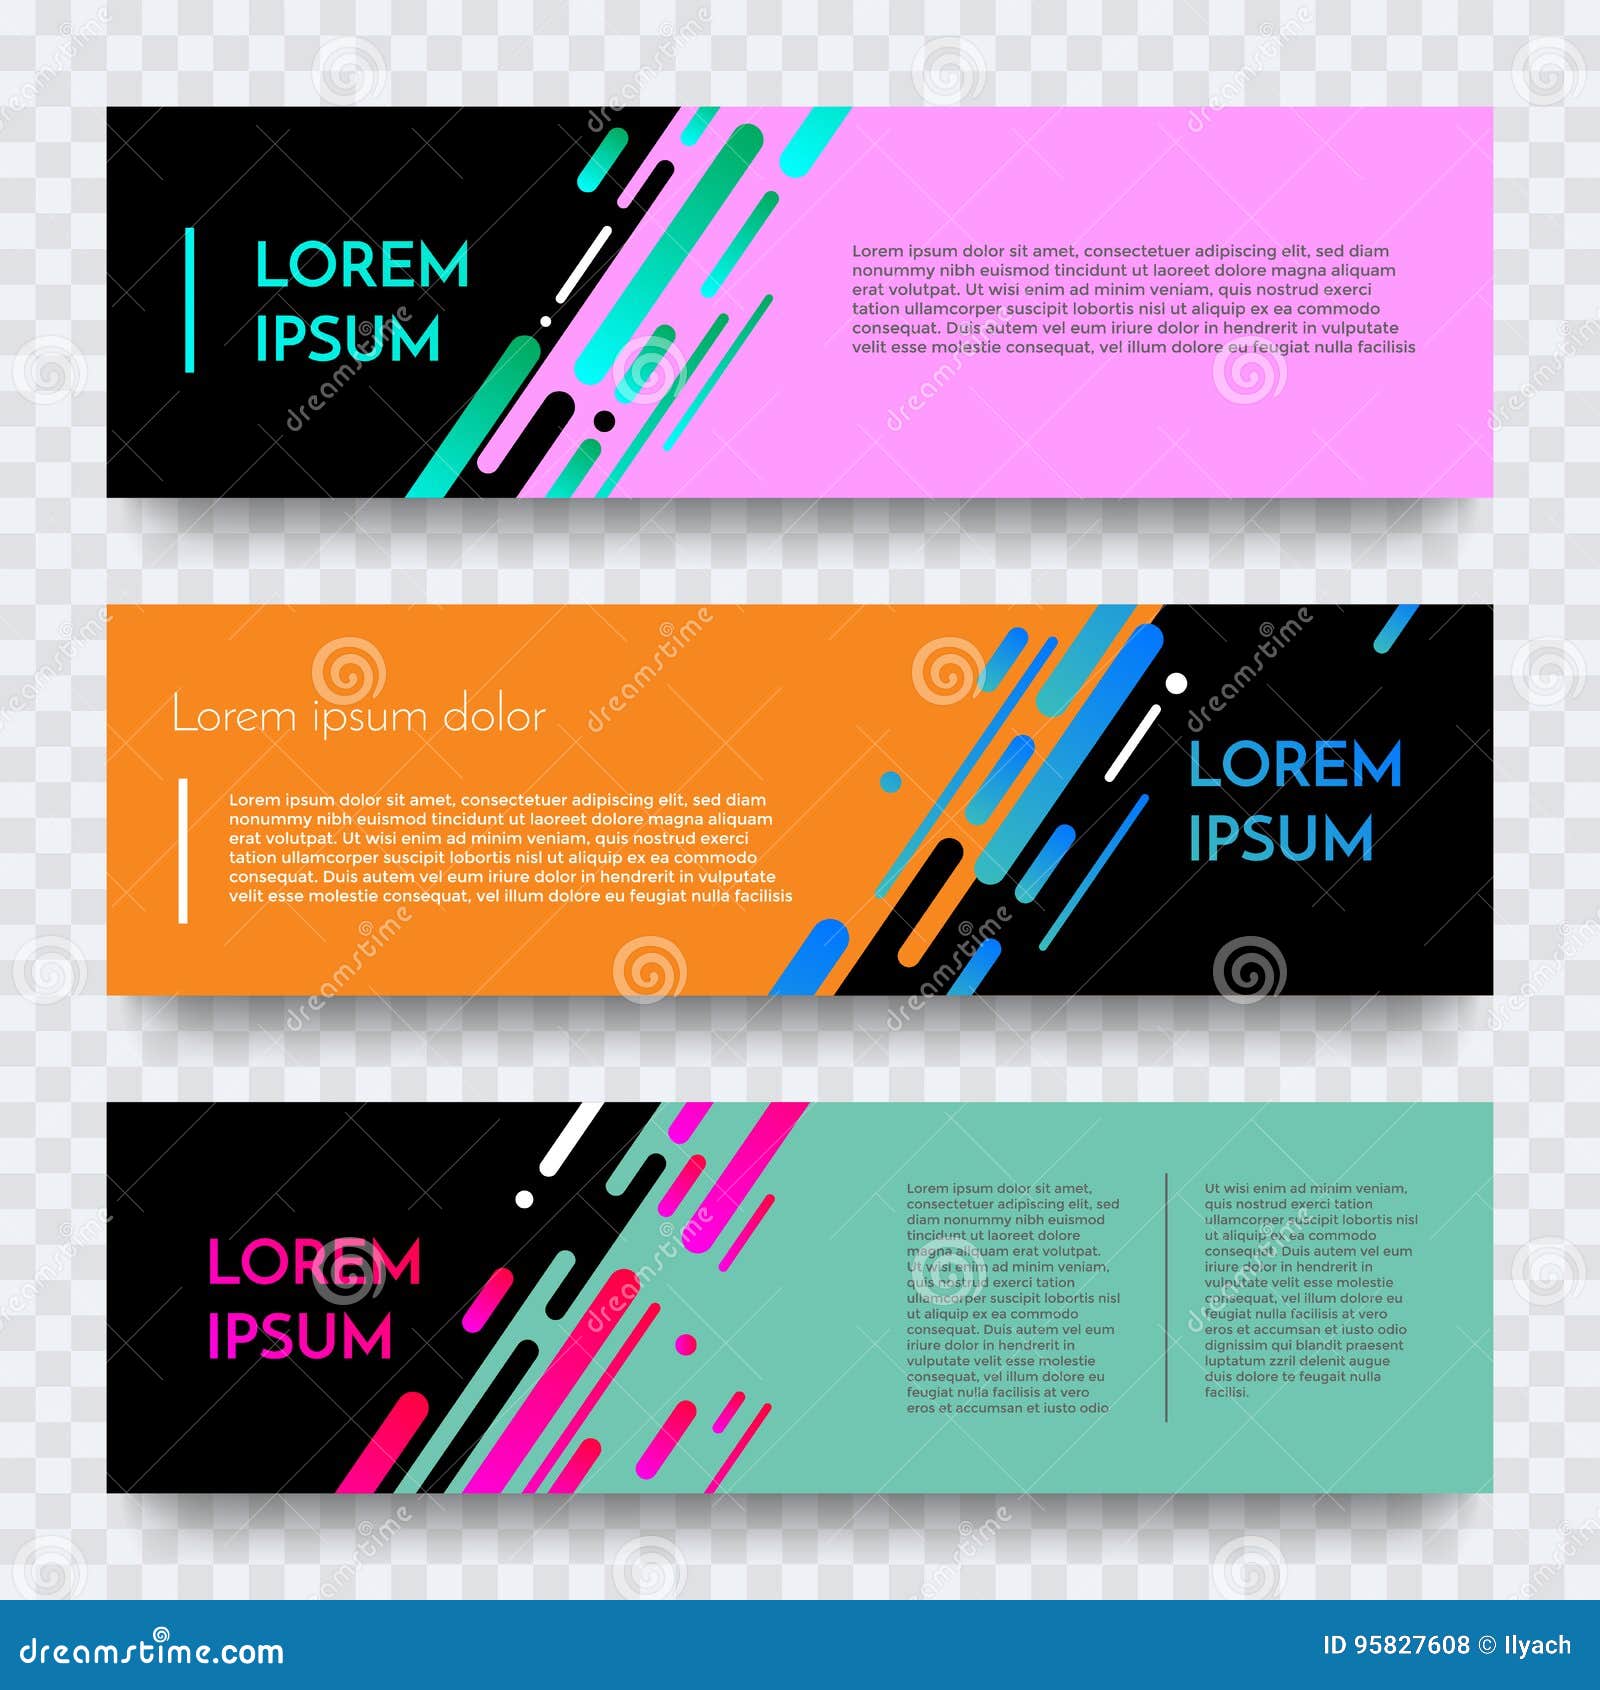 Web Banners Set for Vector Digital Website Background Template With Regard To Website Banner Design Templates